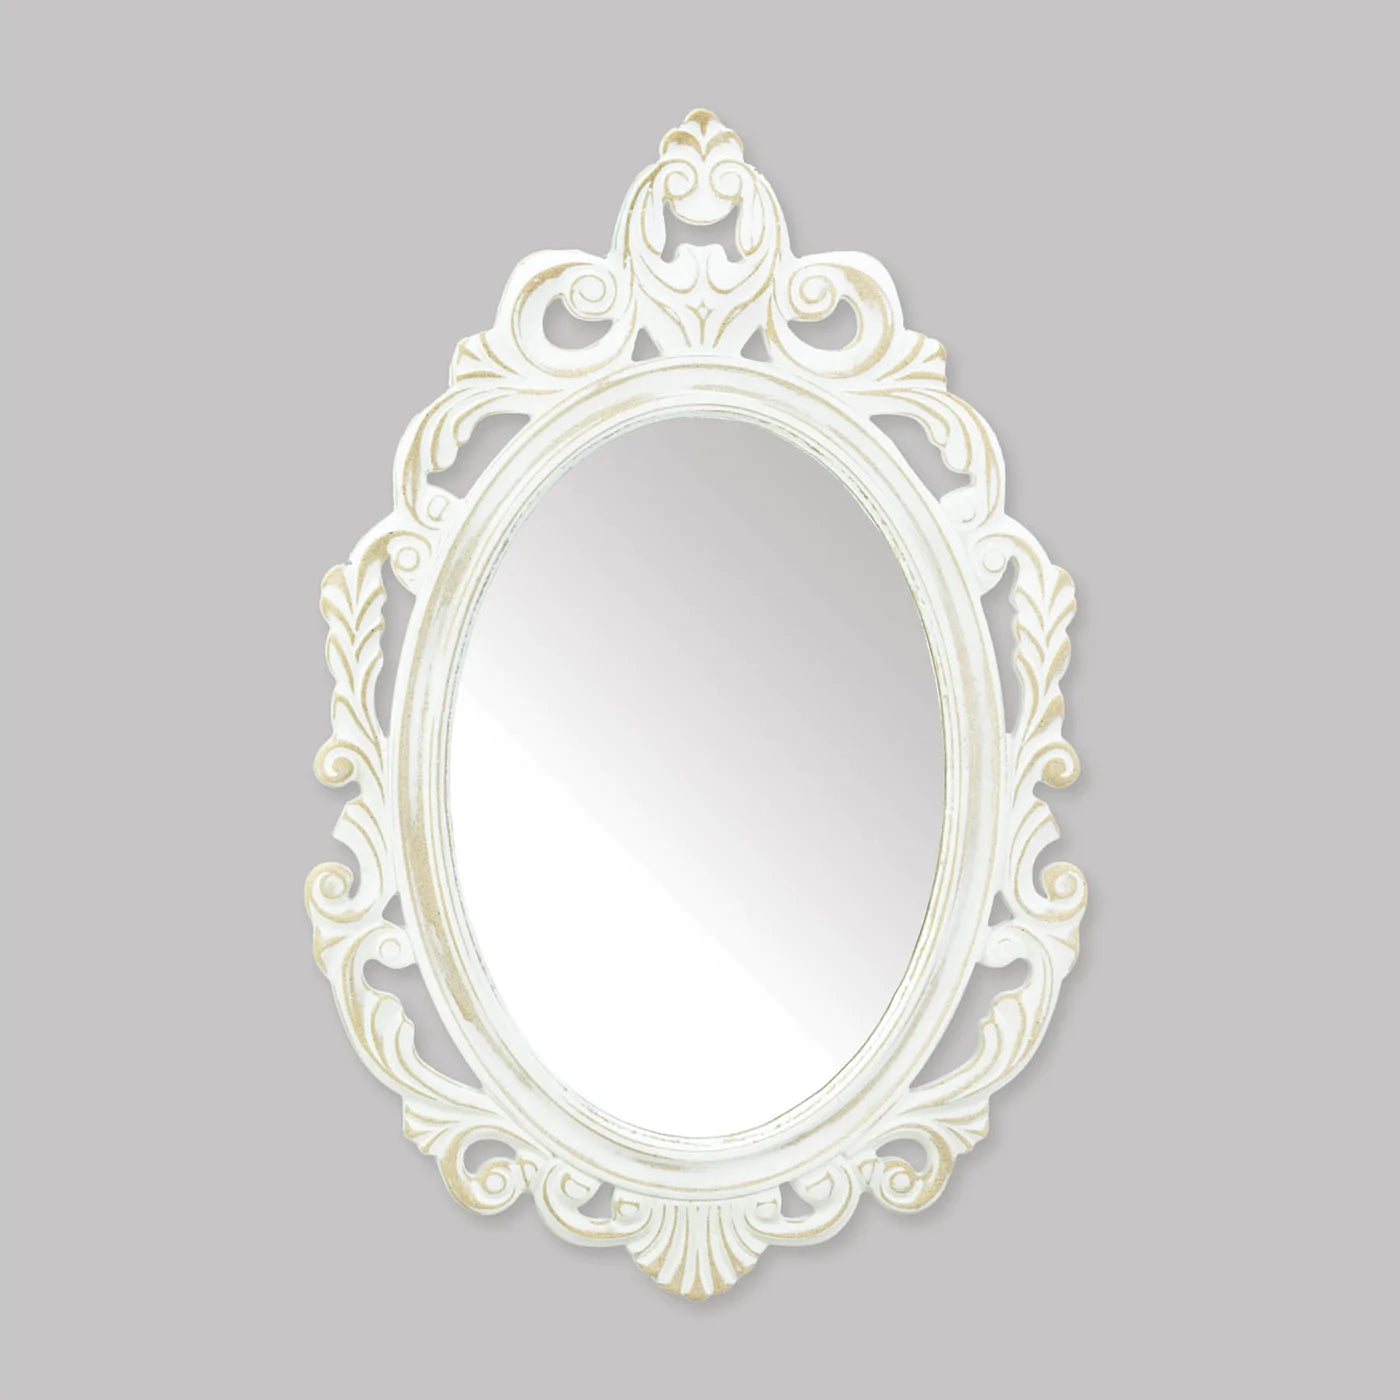 Antiqued White Wall Mirror